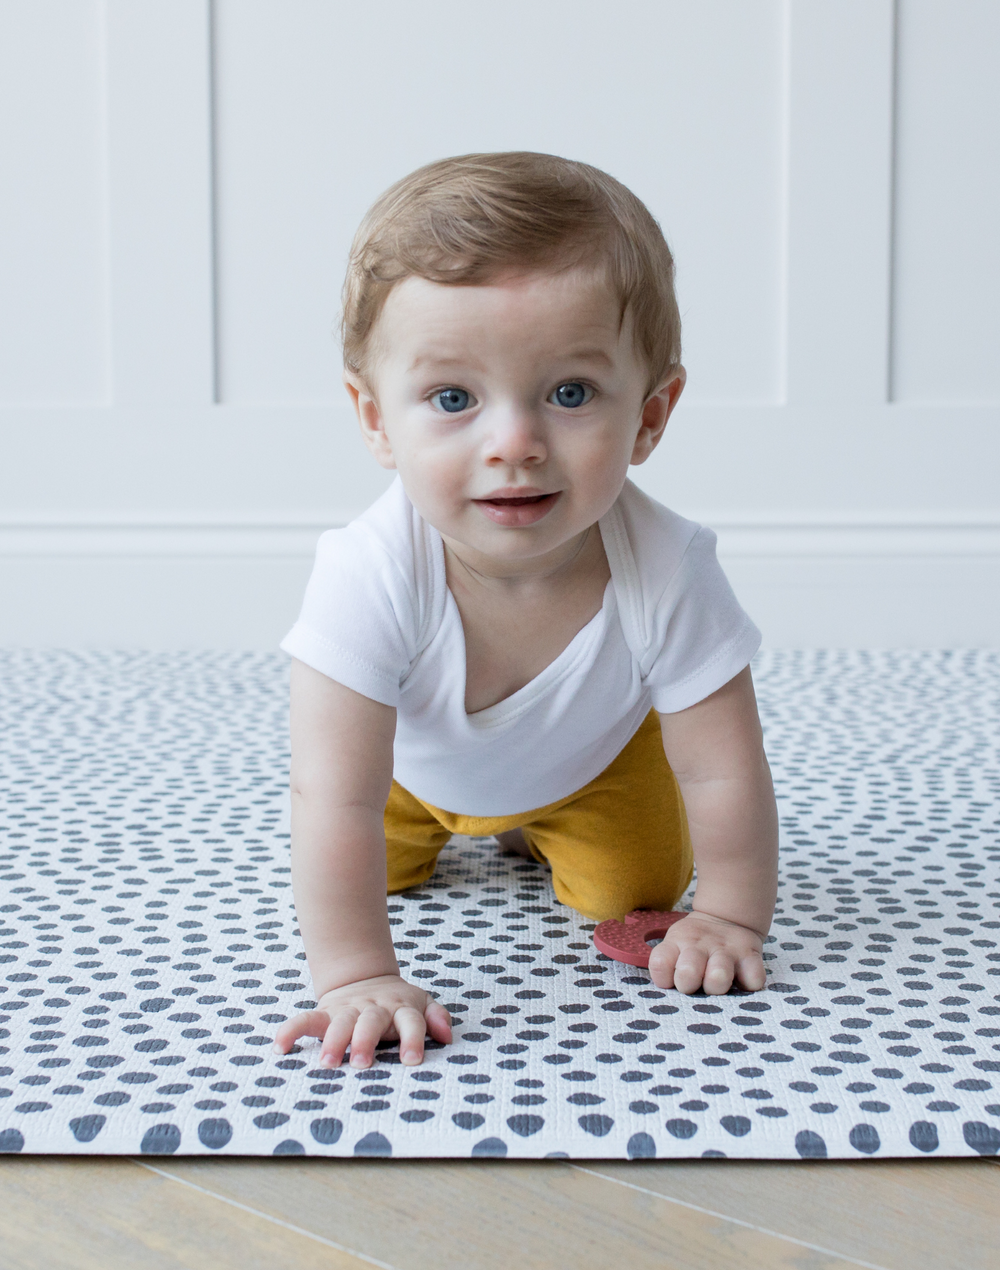 Baby is supported on a minimalist and sleek memory foam baby play mat that blends seamlessly with any decor